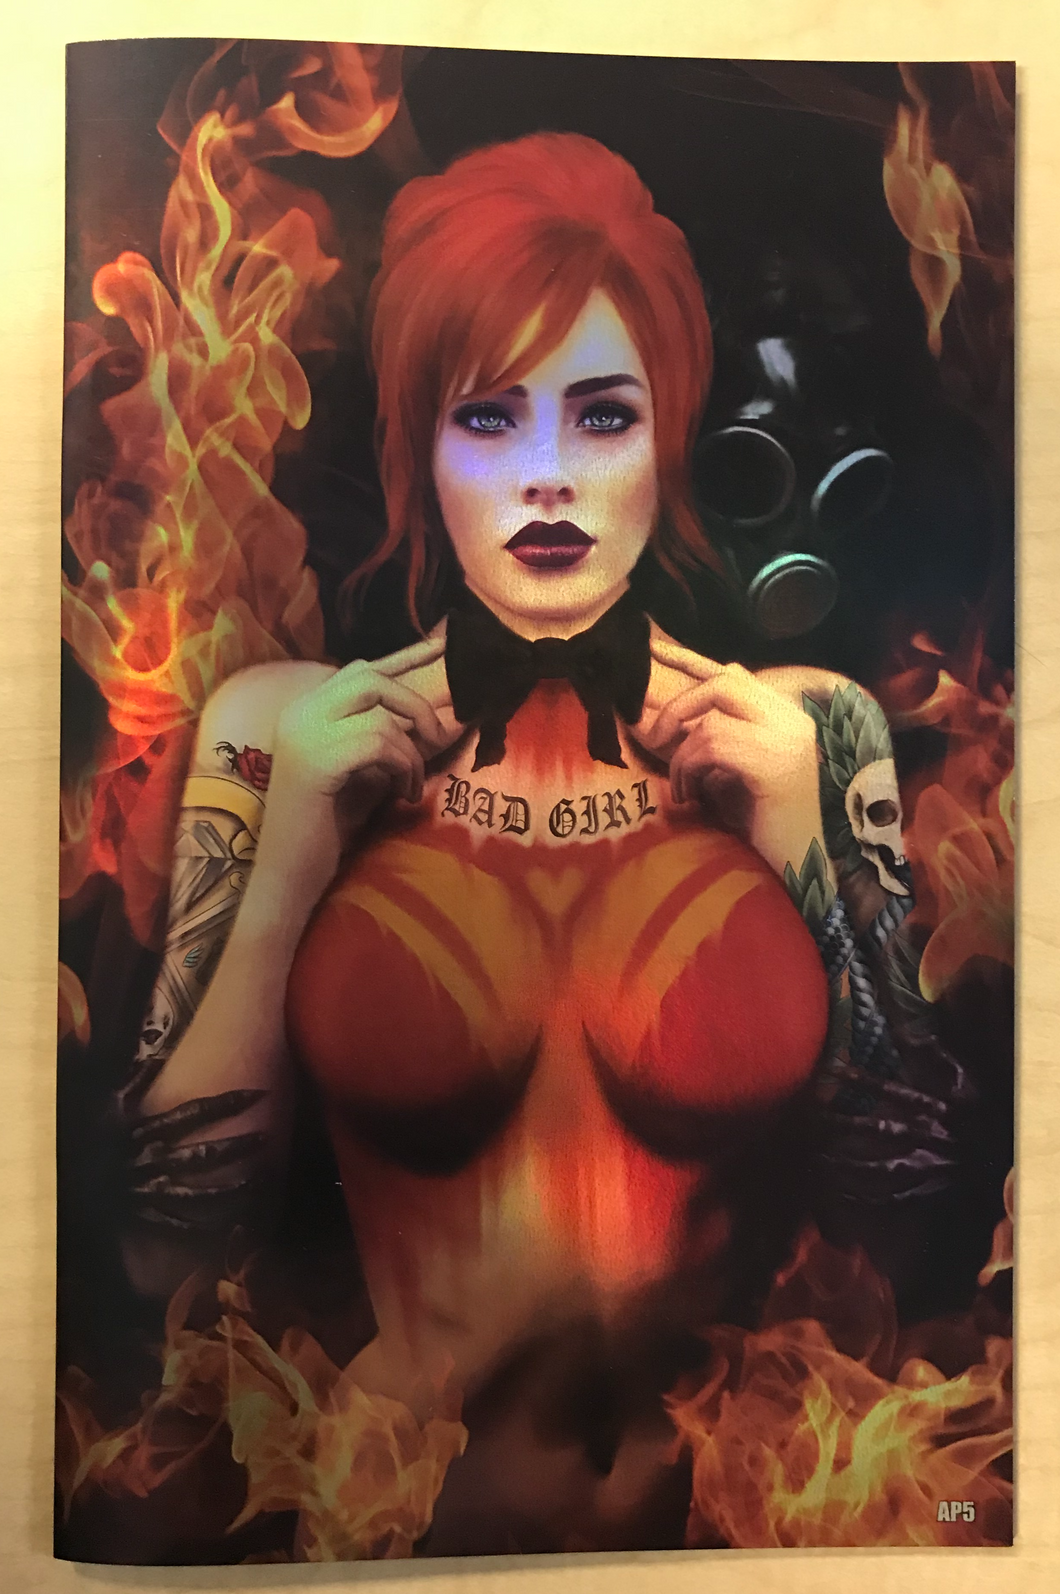 Notti & Nyce: Cosplay Gallery #1 Notti as Phoenix Cosplay Out of Quarantine Nice VIRGIN CHROME HOLOFOIL Variant Cover by Piper Rudich Artist Proof AP Only 10 Copies Made!!!